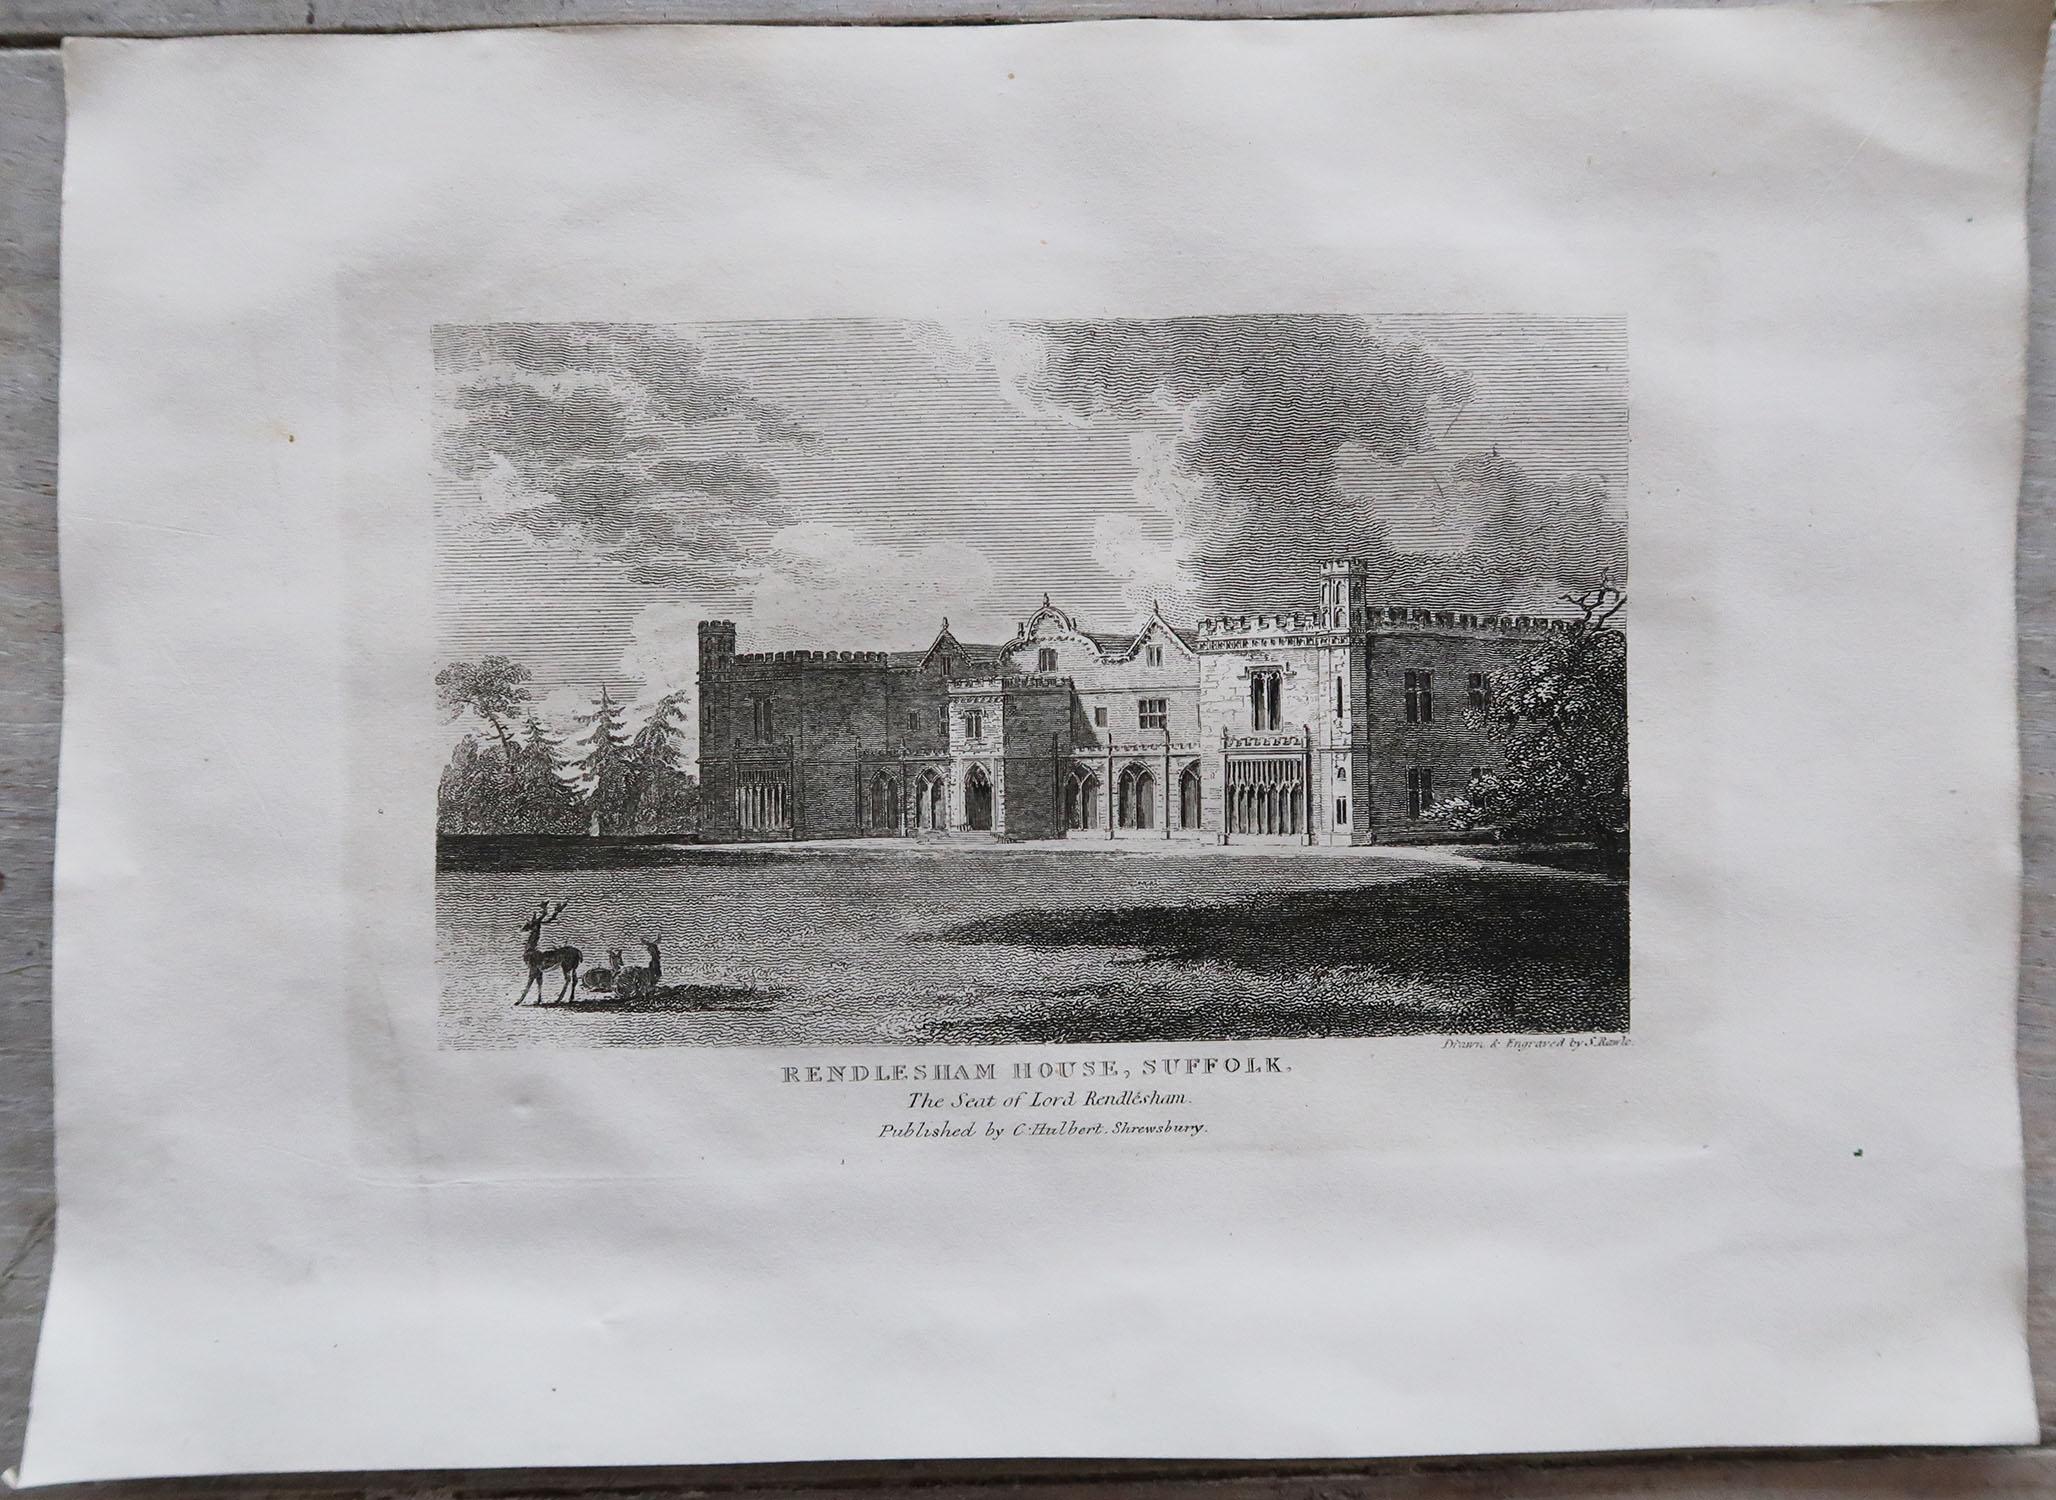 Paper Set of 12 Antique Prints of English Country Houses and Gardens, circa 1800